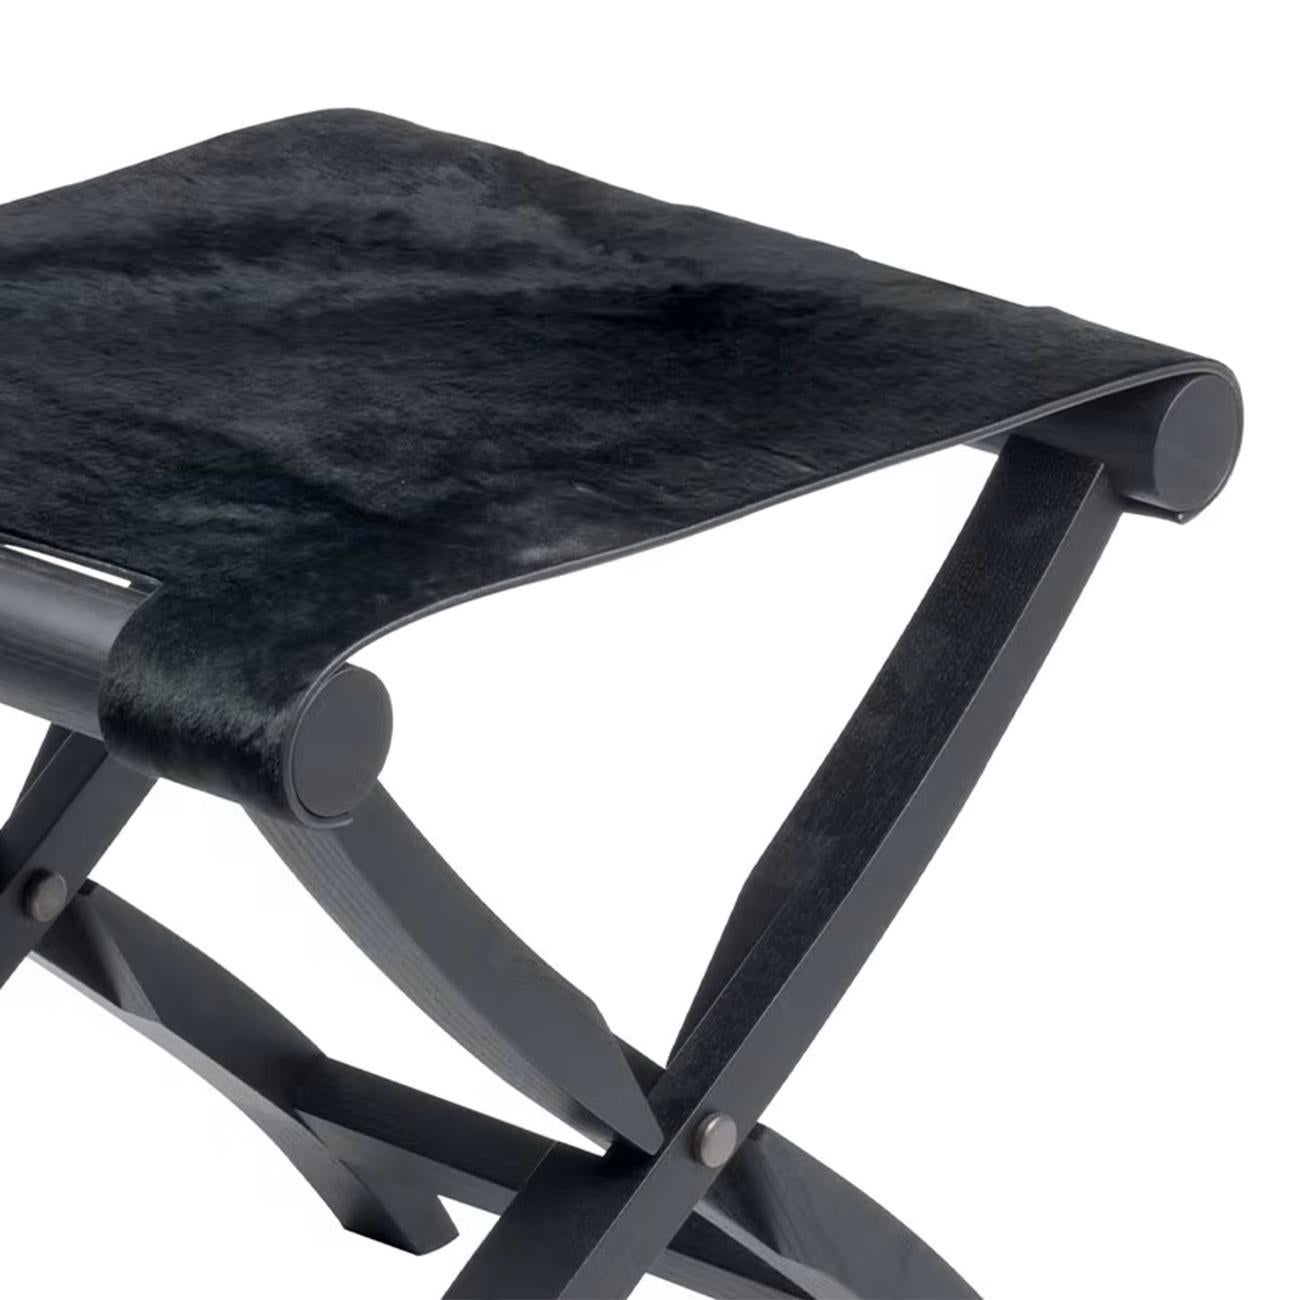 Stool walter folding with folding solid oak base in stained
blackened finish. With merinos wool seat in black finish.